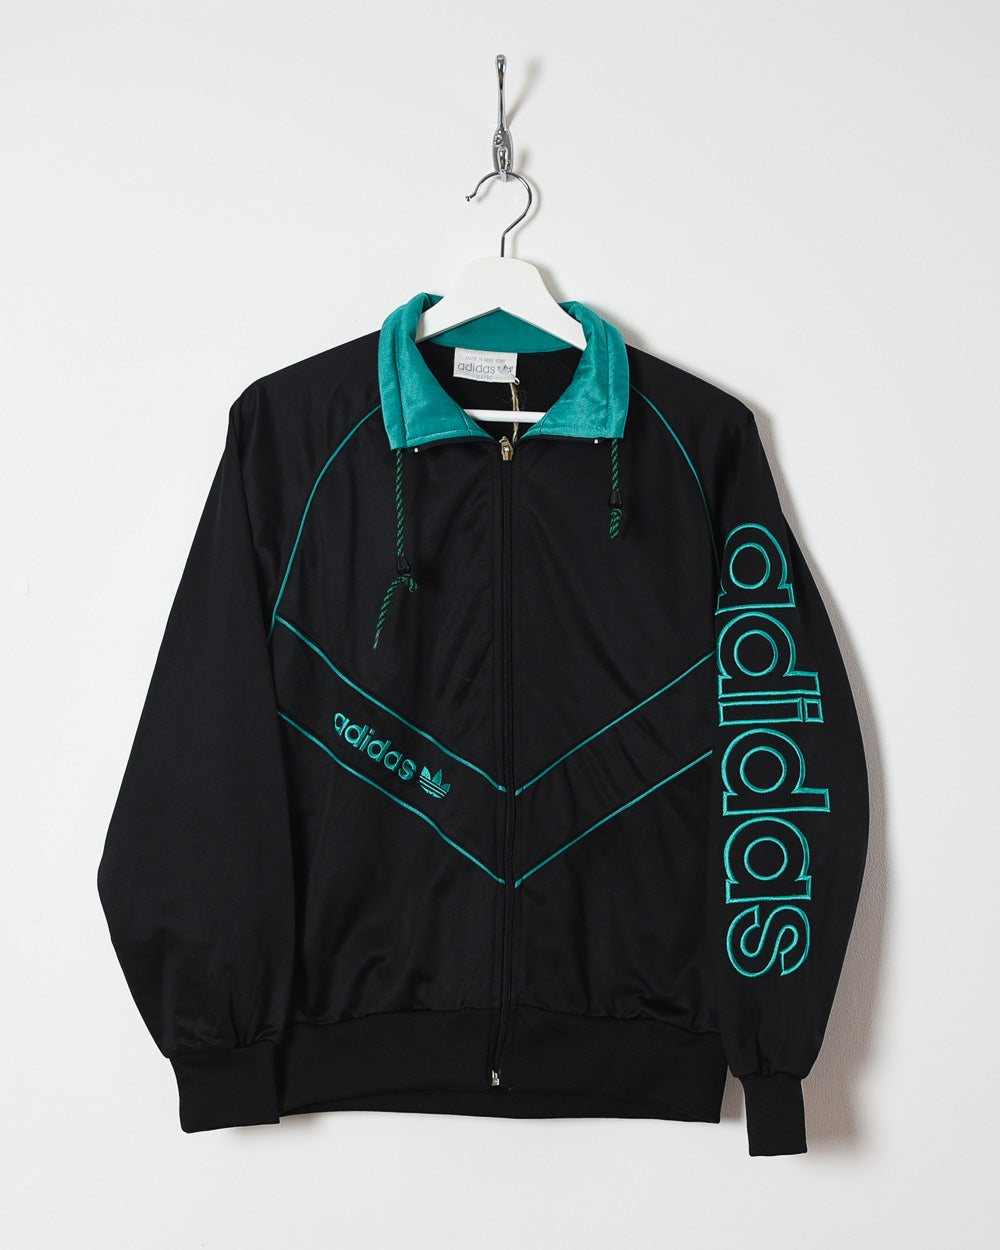 Adidas Tracksuit Top -  Small - Domno Vintage 90s, 80s, 00s Retro and Vintage Clothing 